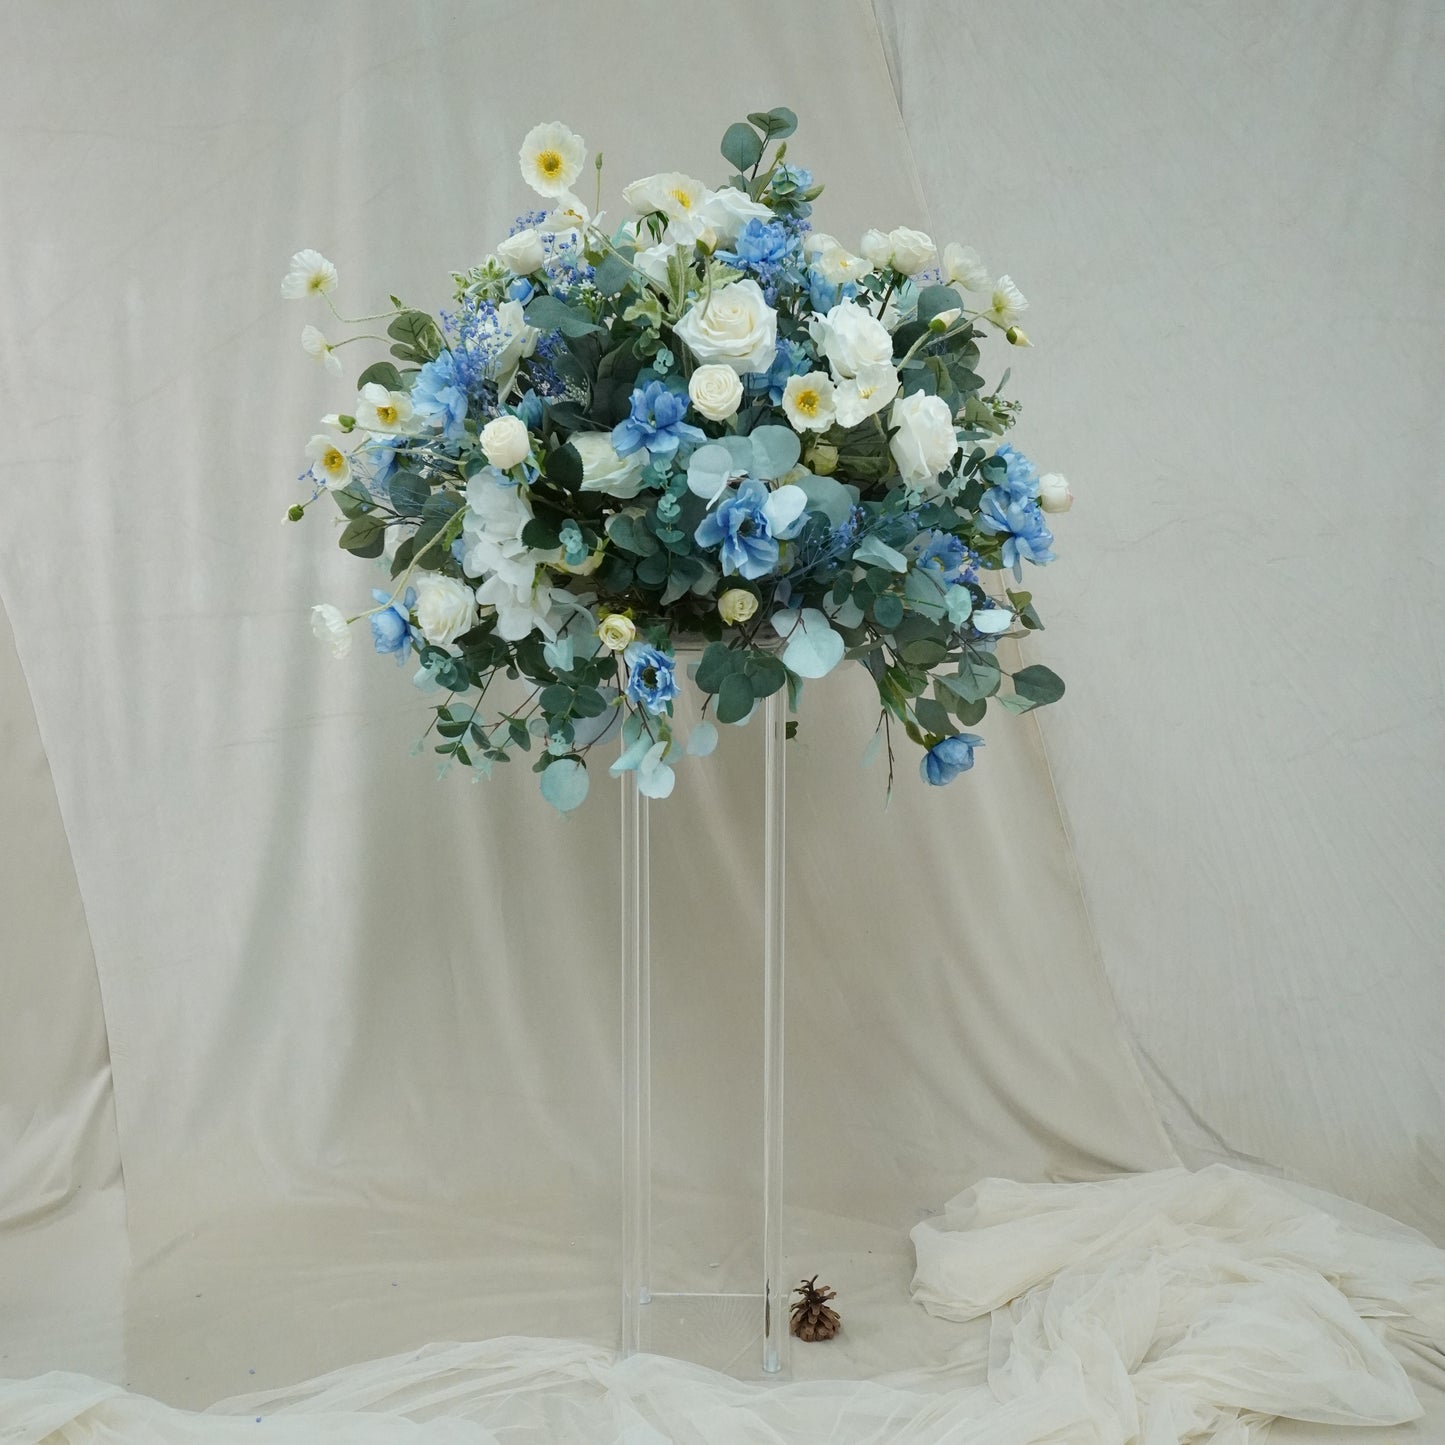 Tall Centrepiece - Large